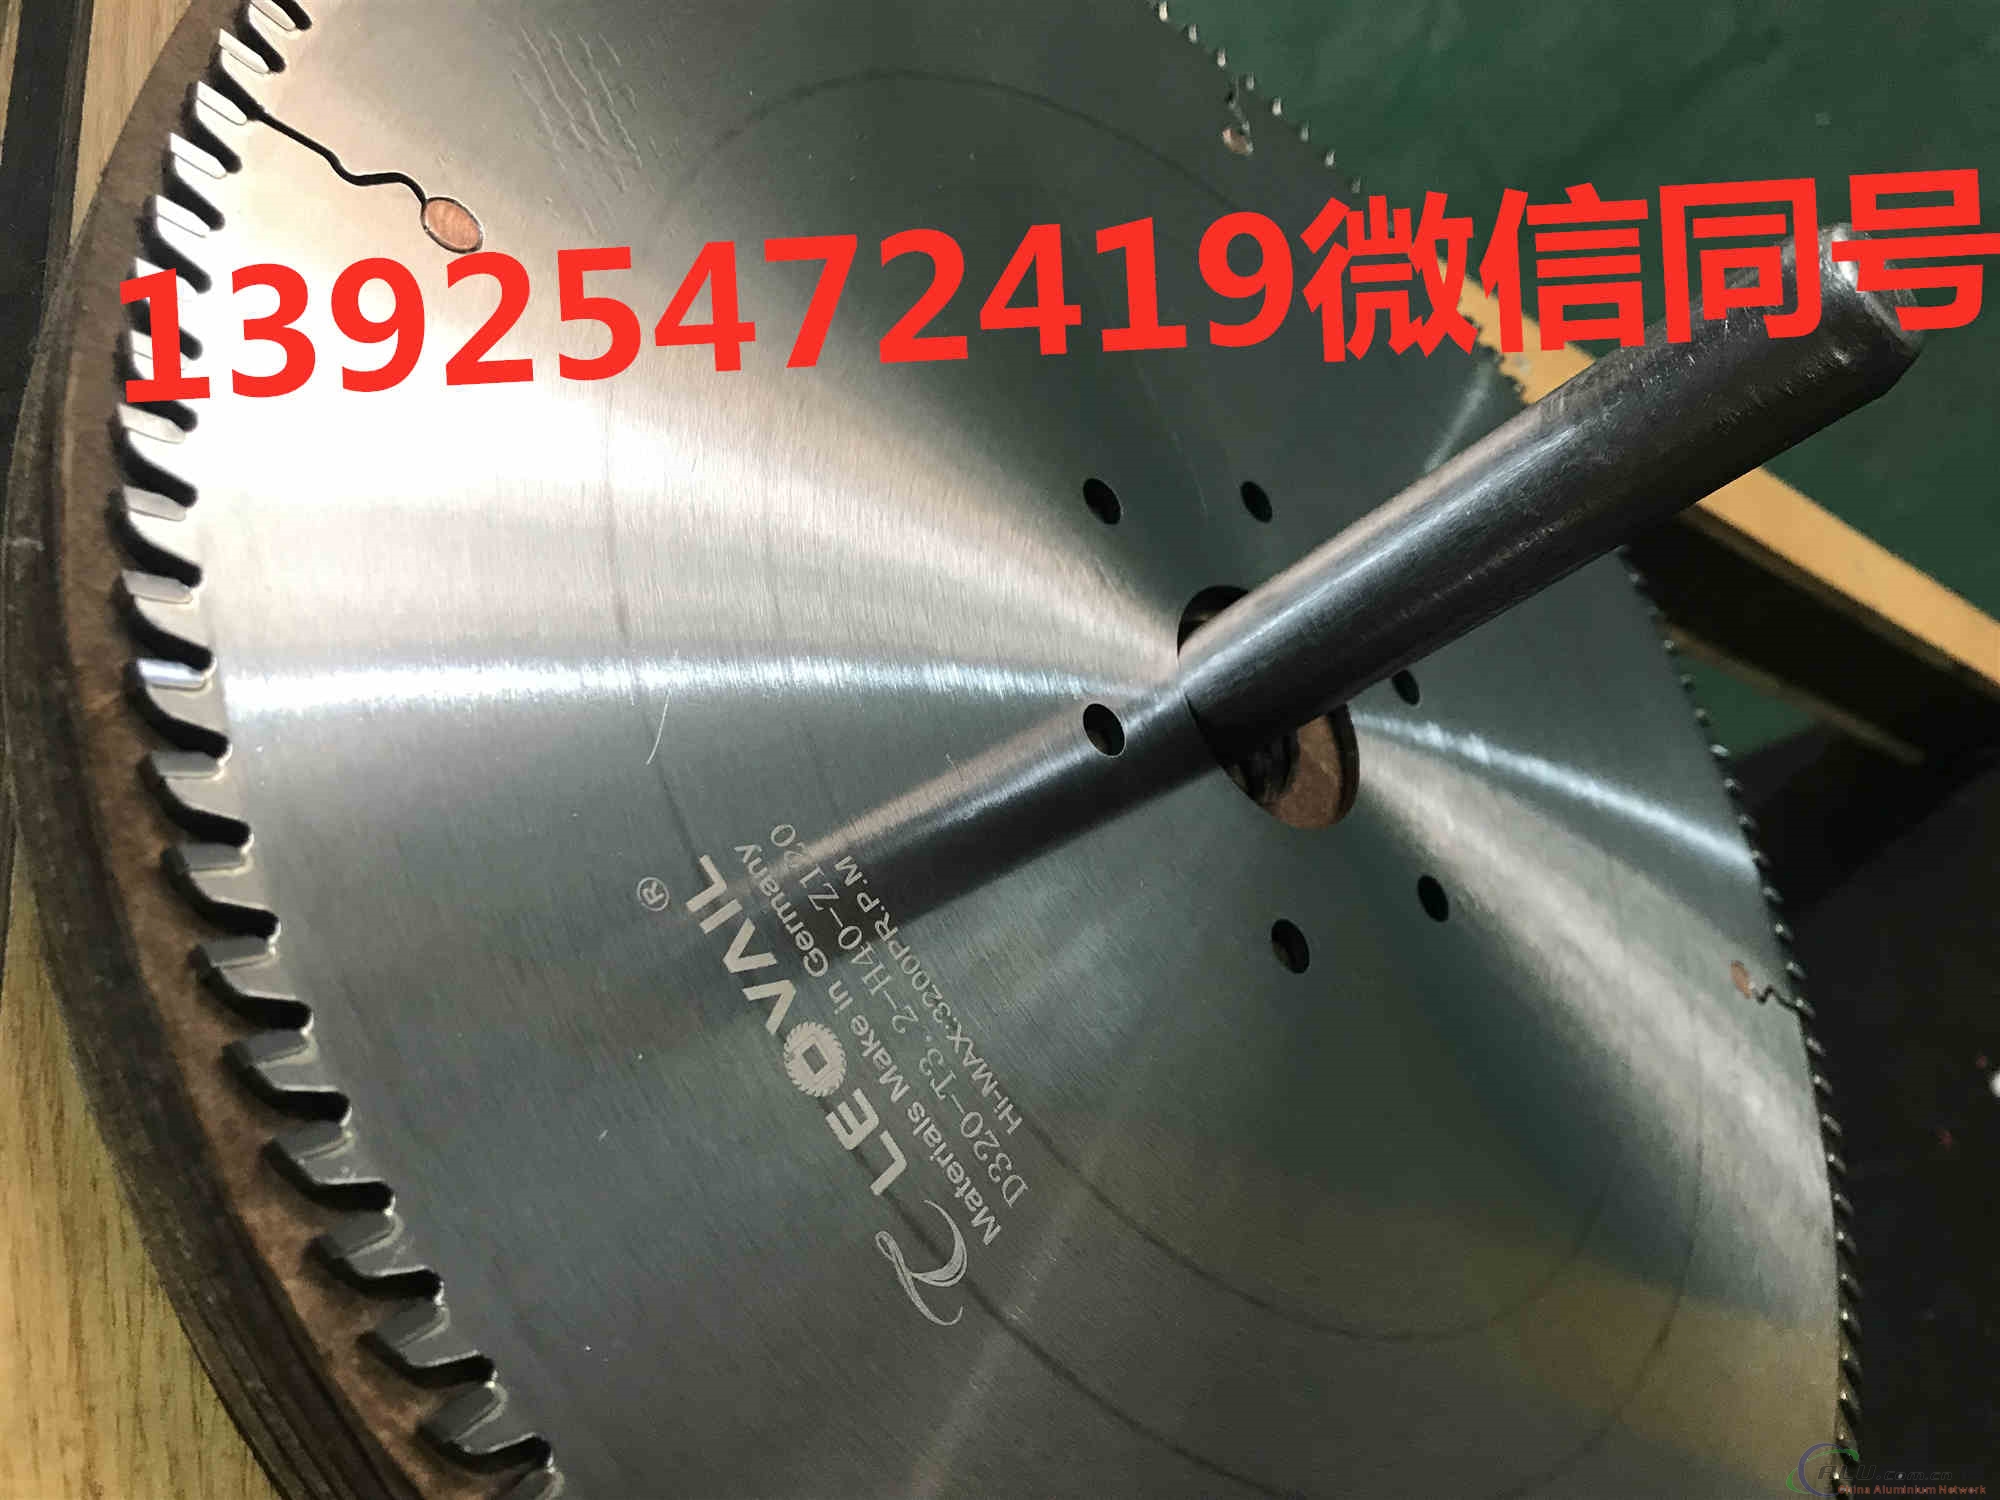 12inch 300mm TCT tungsten carbide tipped hard alloy circular saw blade for wood cutting